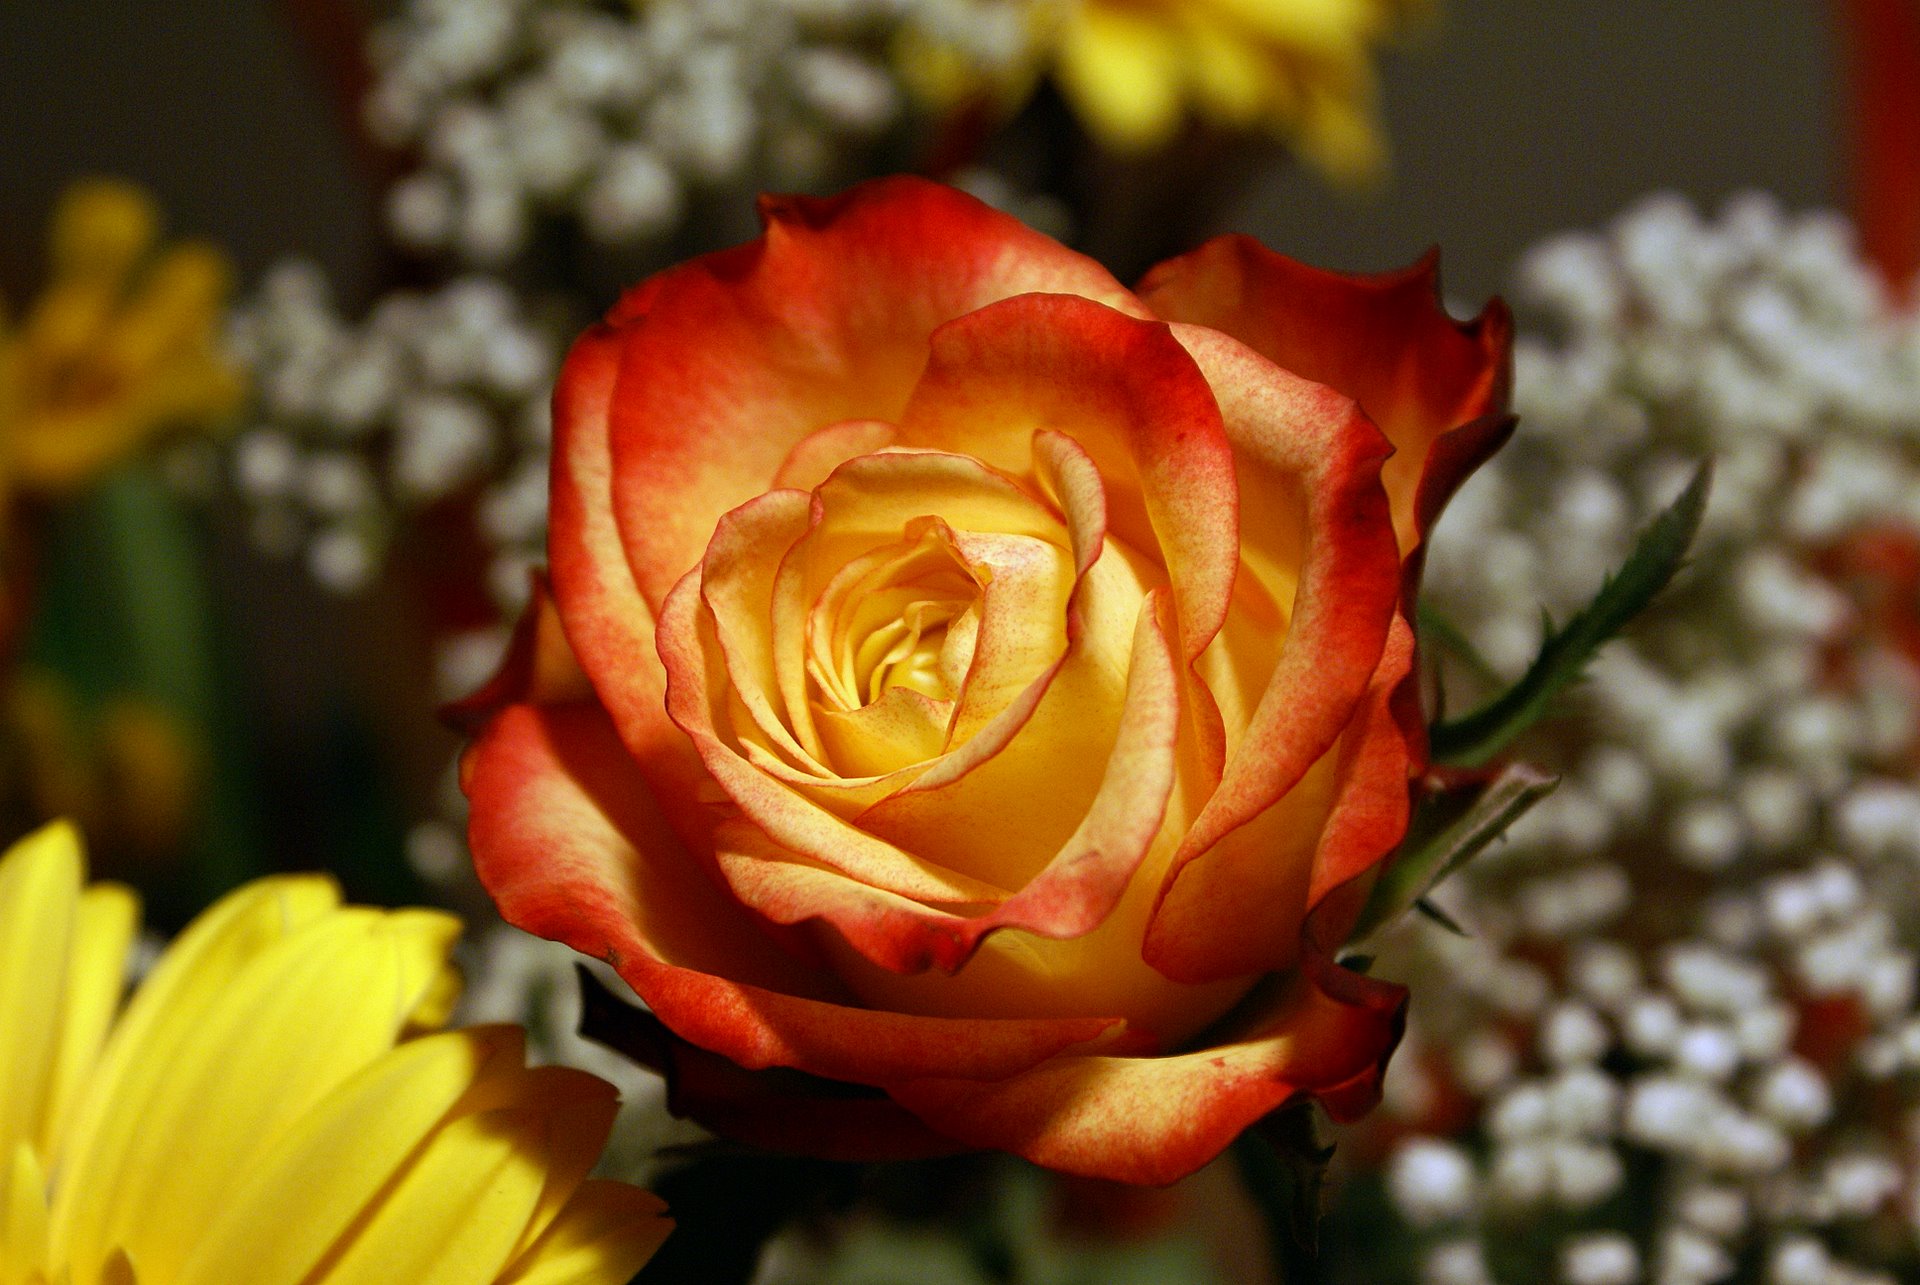 most-beautiful-yellow-red-rose.jpg